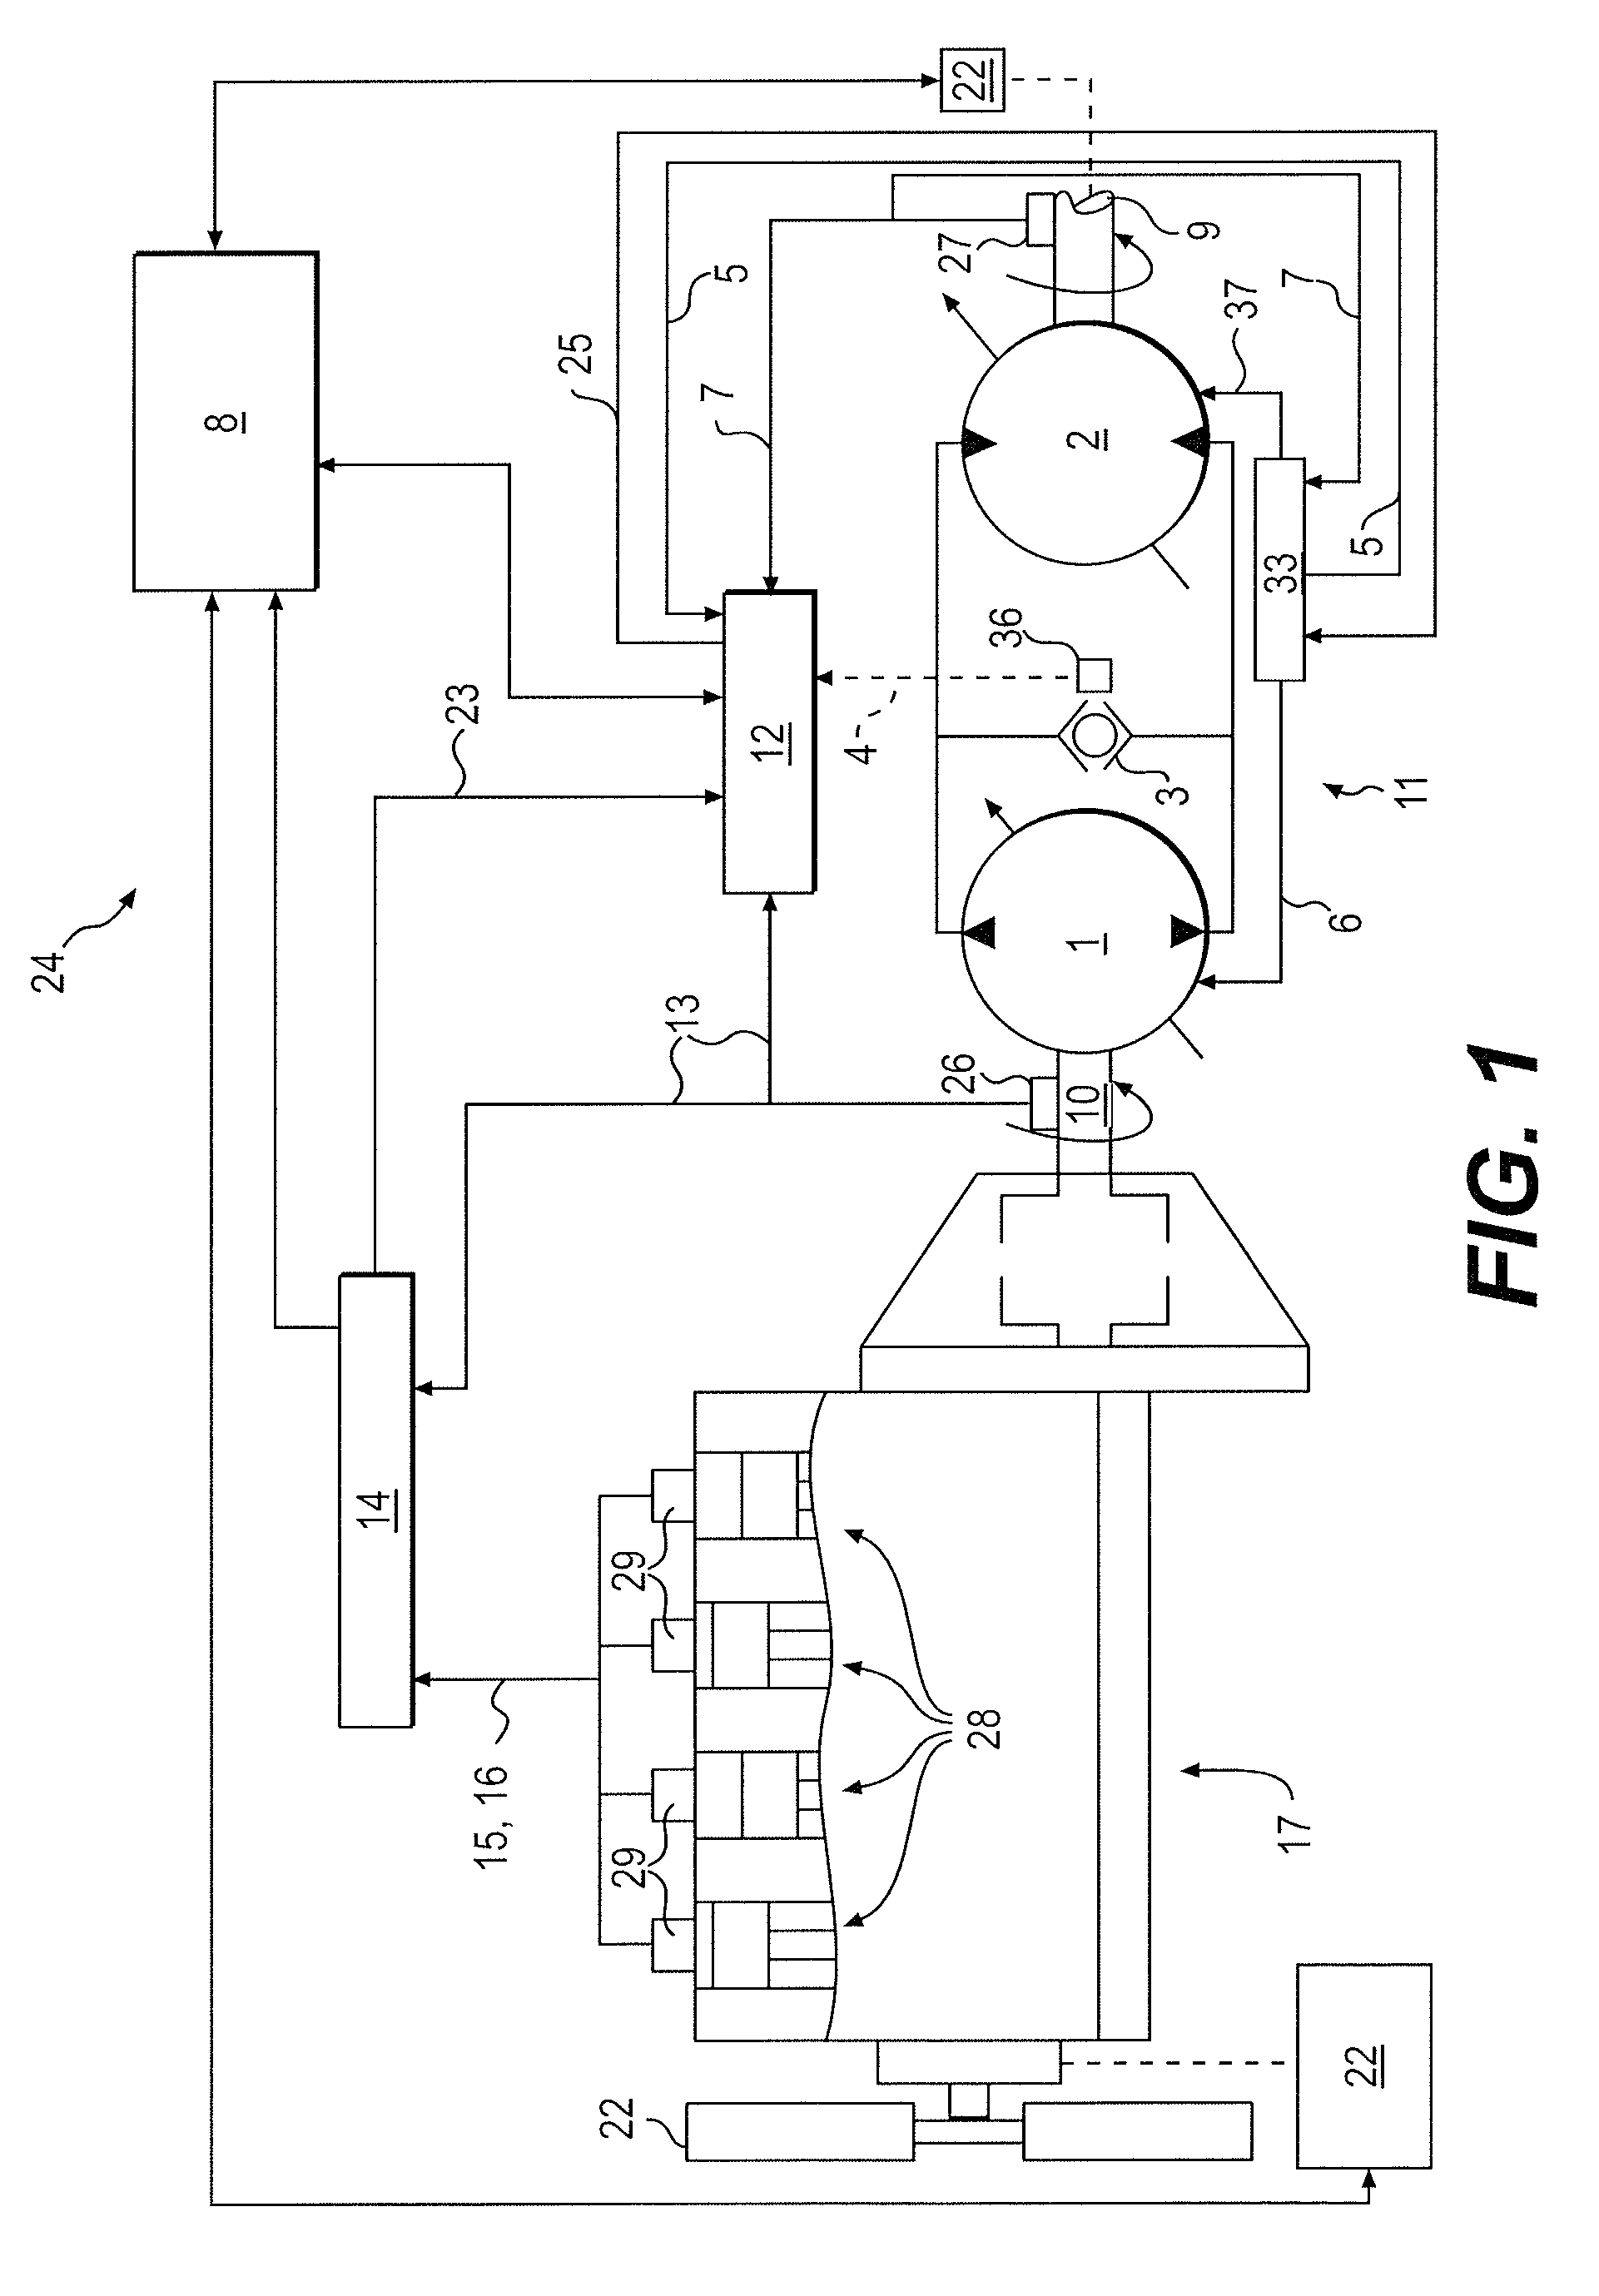 Adaptive power source control system